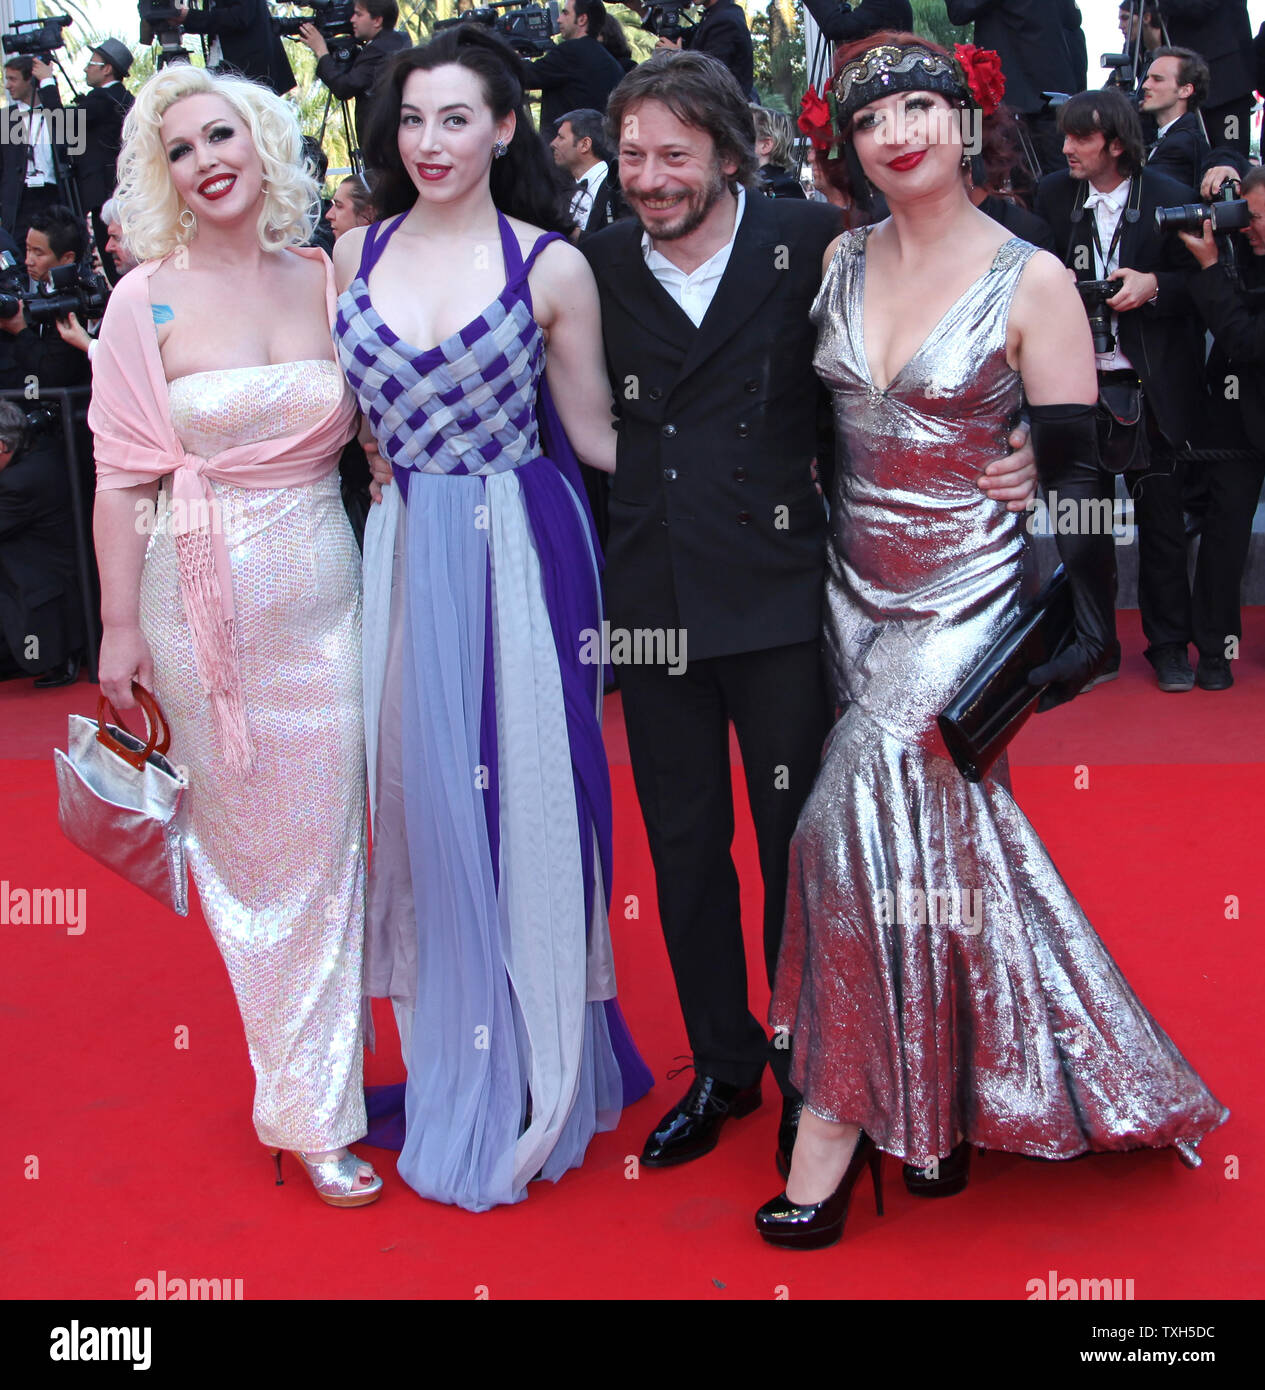 (From L to R) Mimi Le Meaux, Evie Lovelle, Mathieu Amalric and Kitten on the Keys arrive on the red carpet before the screening of the film 'The Tree' during the 63rd annual Cannes International Film Festival in Cannes, France on May 23, 2010.  UPI/David Silpa Stock Photo